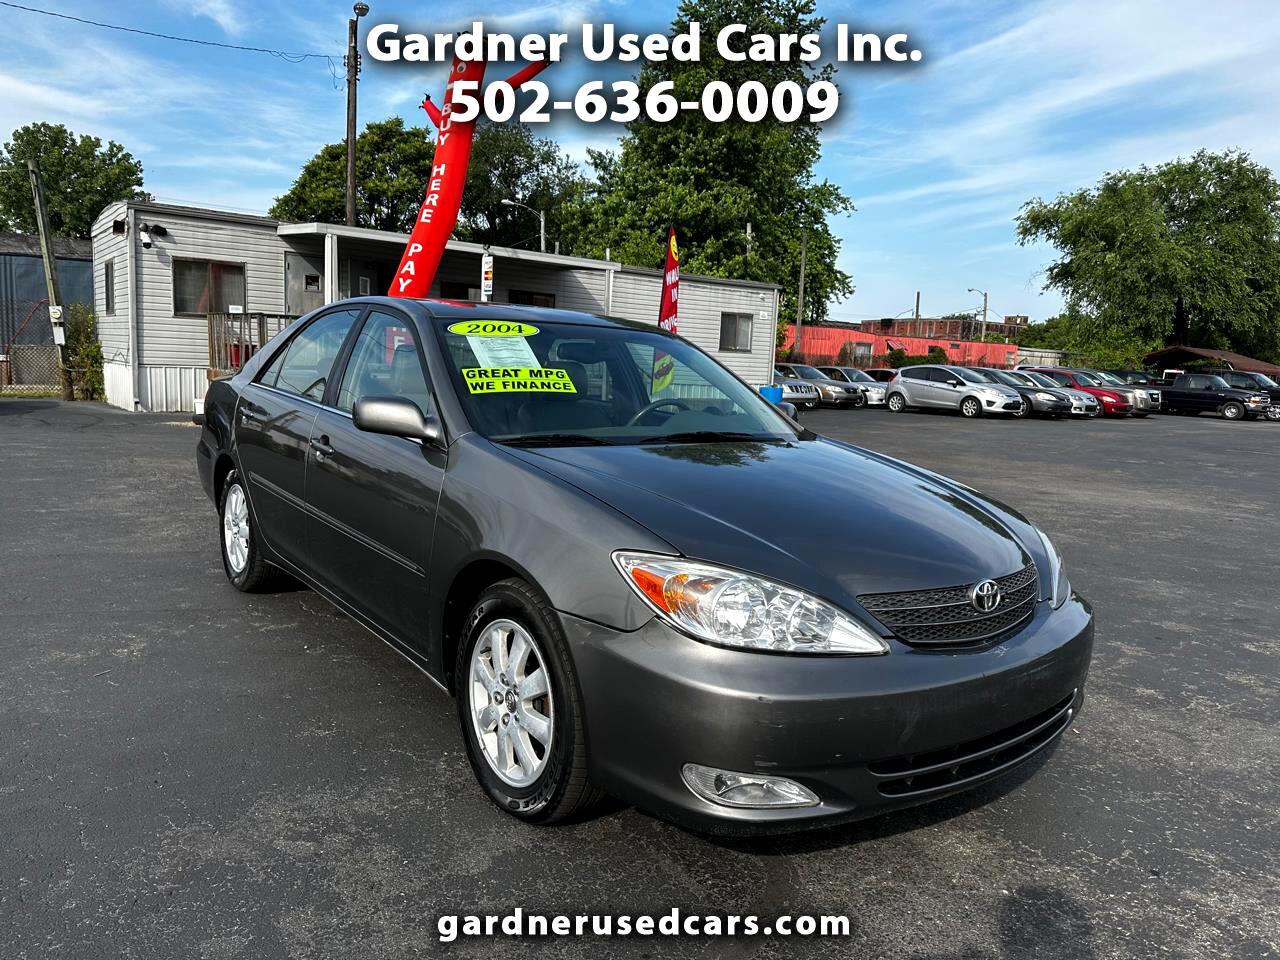 Toyota Camry 4dr Sdn XLE Auto (Natl) 2004